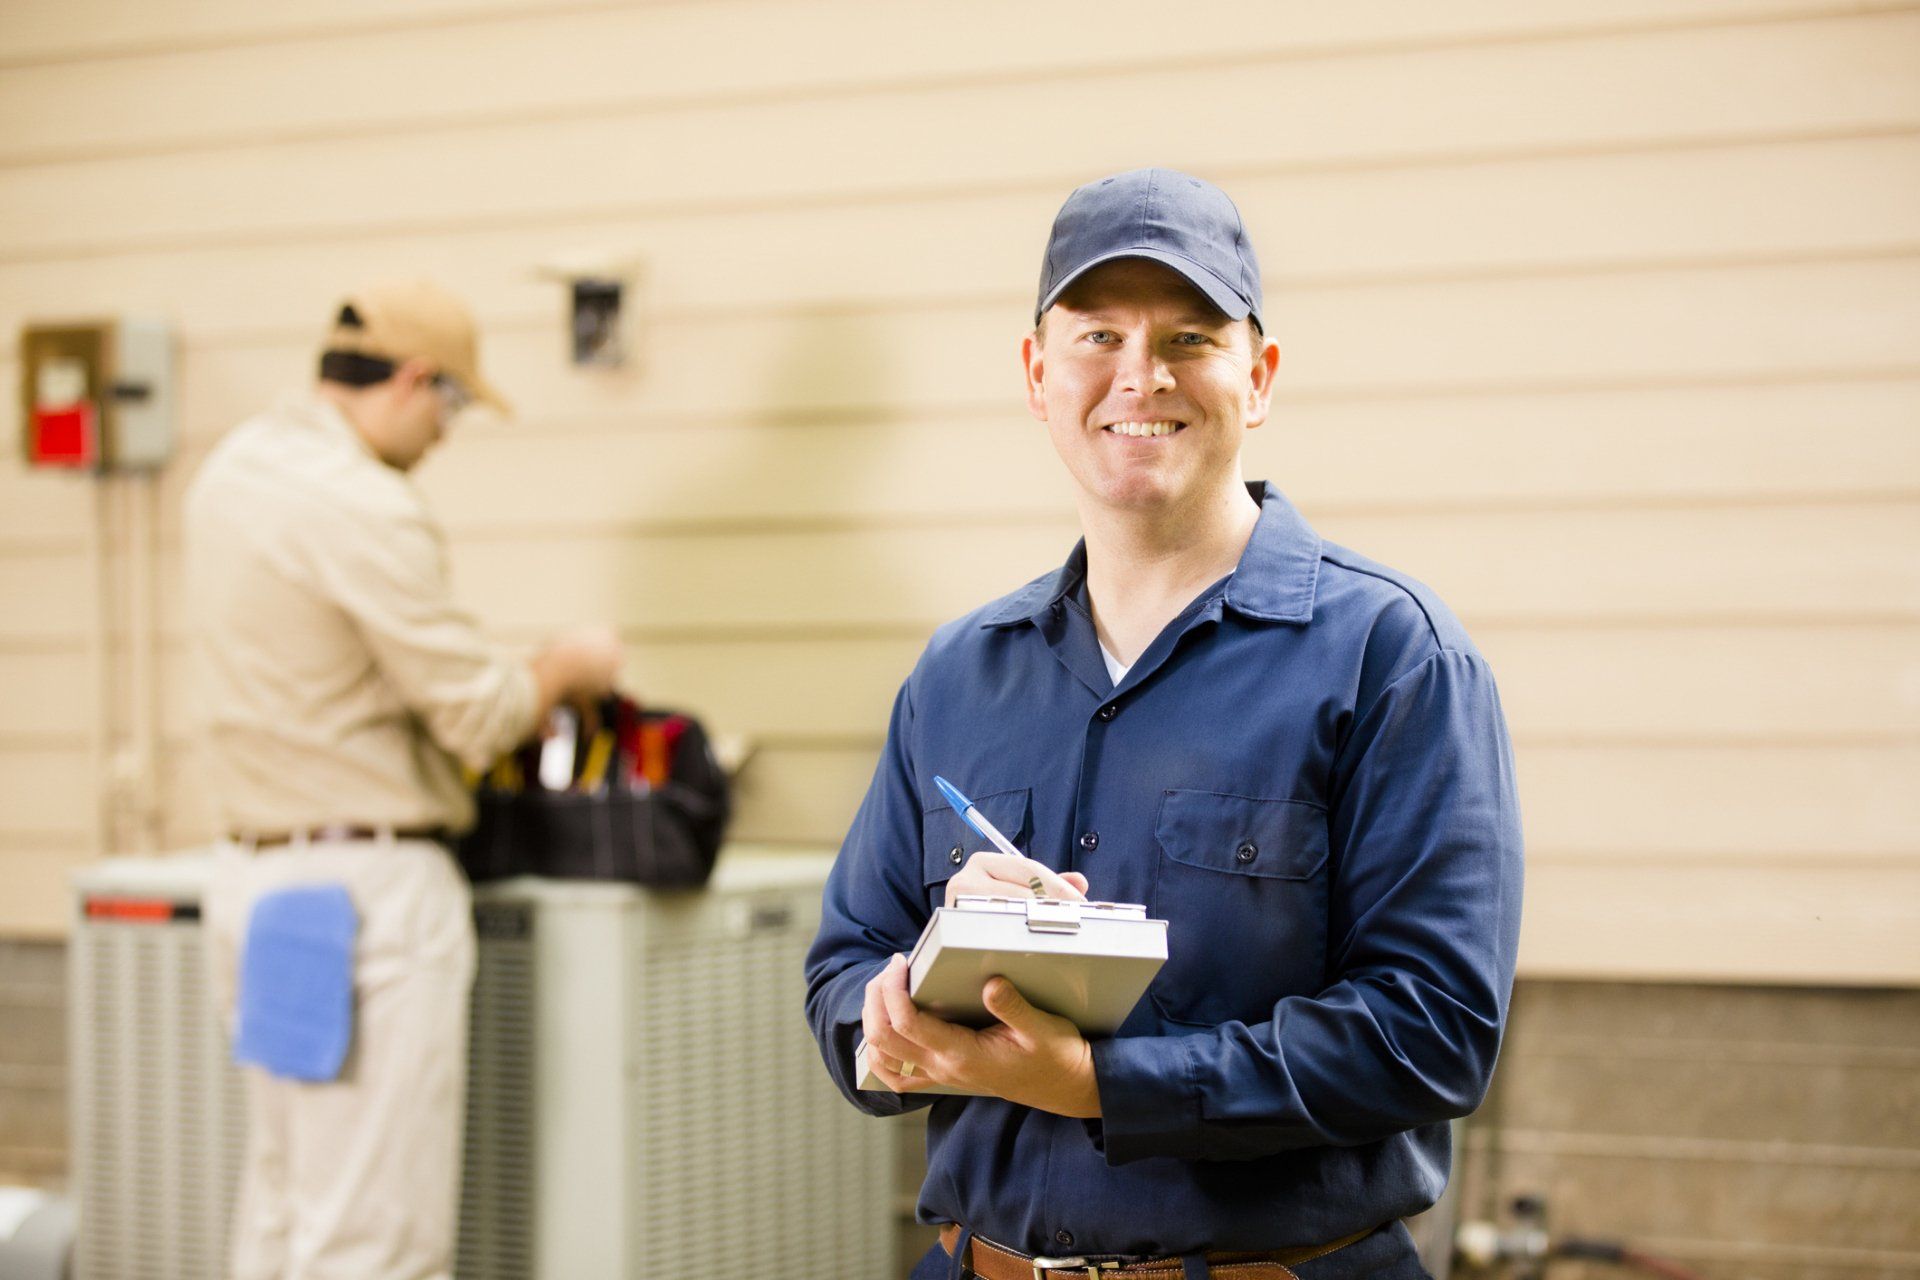 Heating And Cooling System repairmen